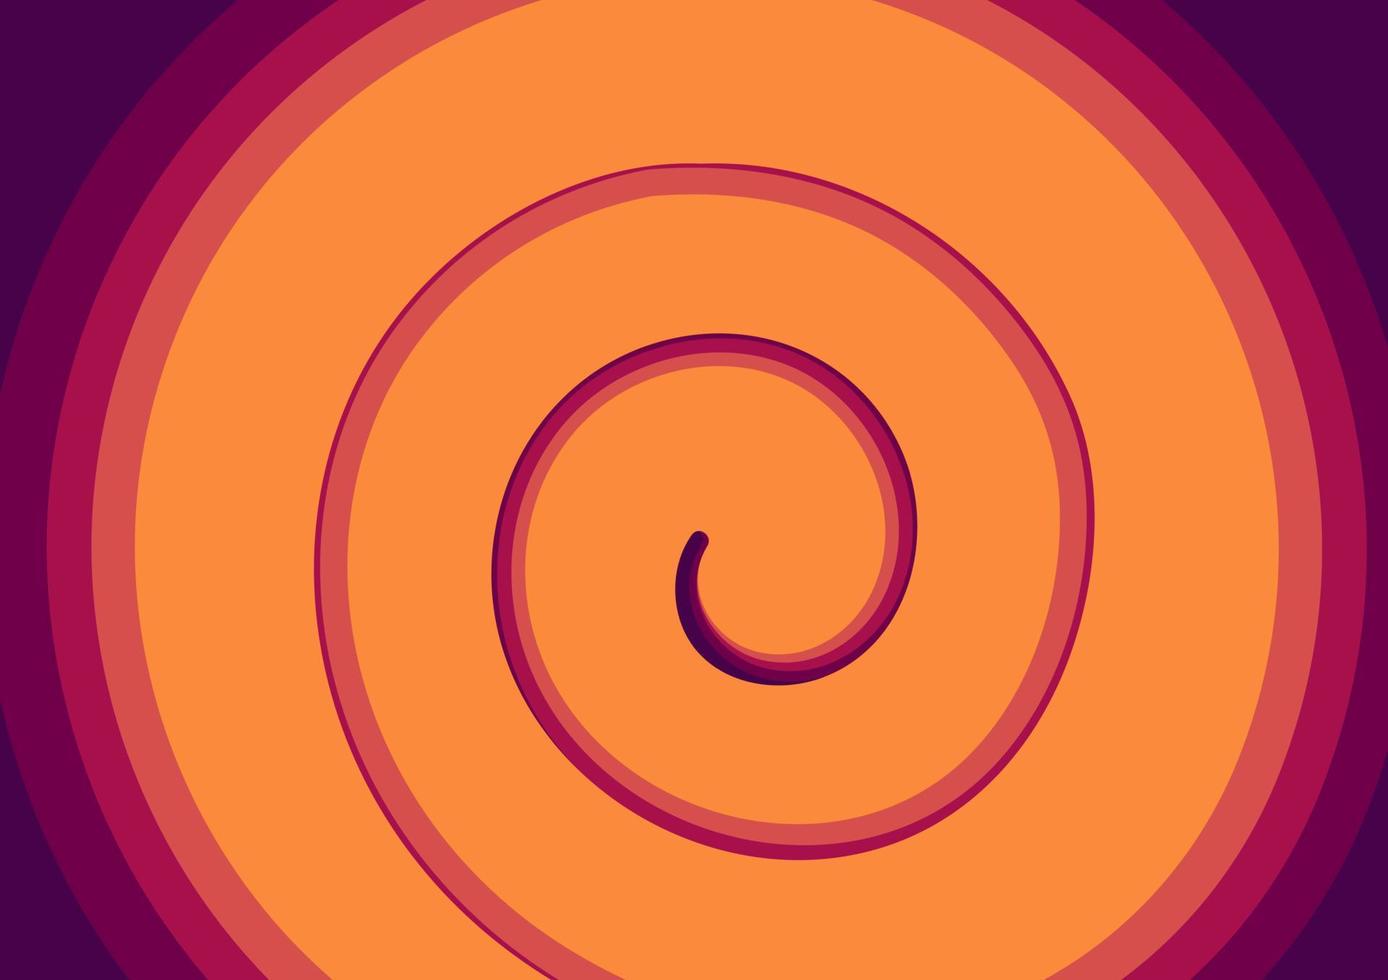 spiral background with abstract theme vector